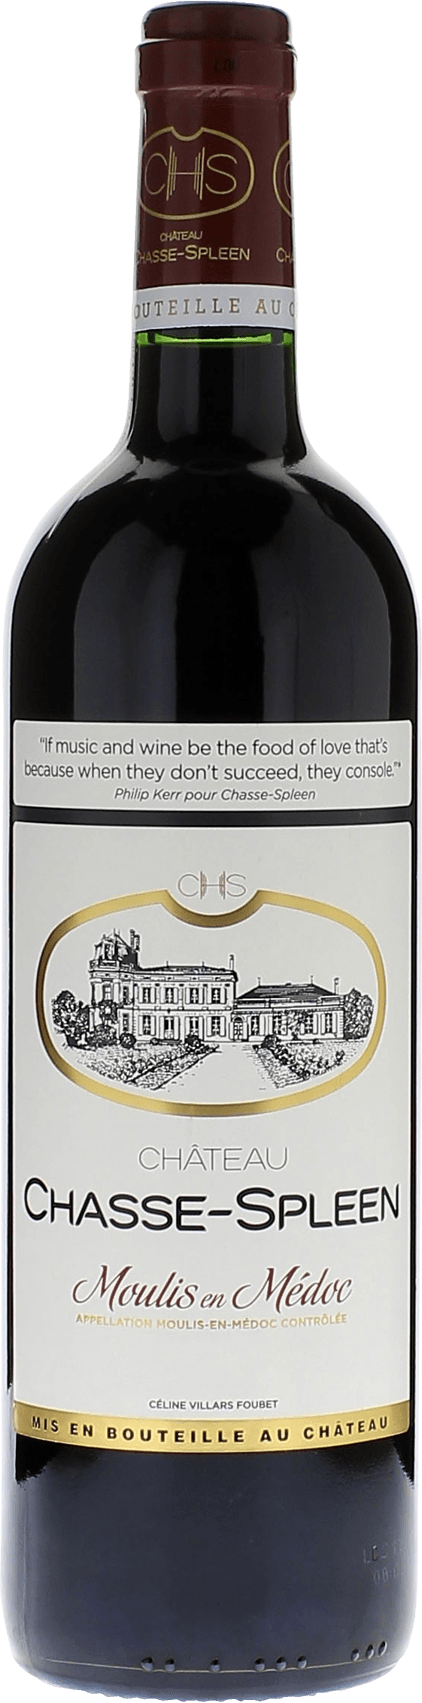 Chasse spleen 2015 Cru Bourgeois Exceptionnel Moulis, Bordeaux rouge